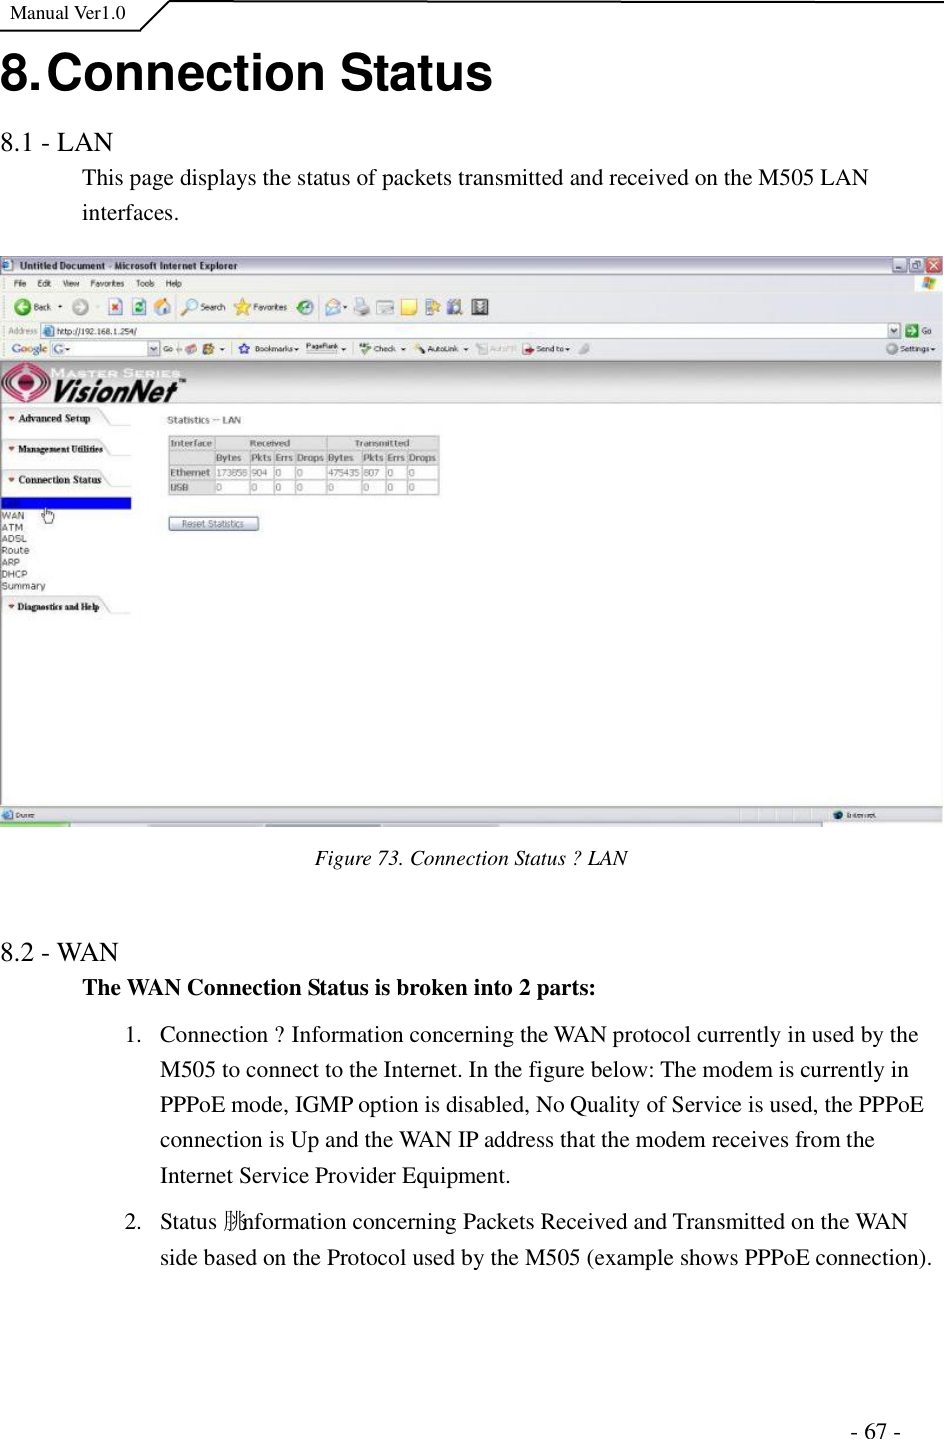  Manual Ver1.0 8. Connection Status 8.1 - LAN This page displays the status of packets transmitted and received on the M505 LAN interfaces. Figure 73. Connection Status ?LAN  8.2 - WAN The WAN Connection Status is broken into 2 parts: 1.Connection ?Information concerning the WAN protocol currently in used by the M505 to connect to the Internet. In the figure below: The modem is currently in PPPoE mode, IGMP option is disabled, No Quality of Service is used, the PPPoE connection is Up and the WAN IP address that the modem receives from the Internet Service Provider Equipment.  2.Status 朓nformation concerning Packets Received and Transmitted on the WAN side based on the Protocol used by the M505 (example shows PPPoE connection).                                                                      - 67 - 